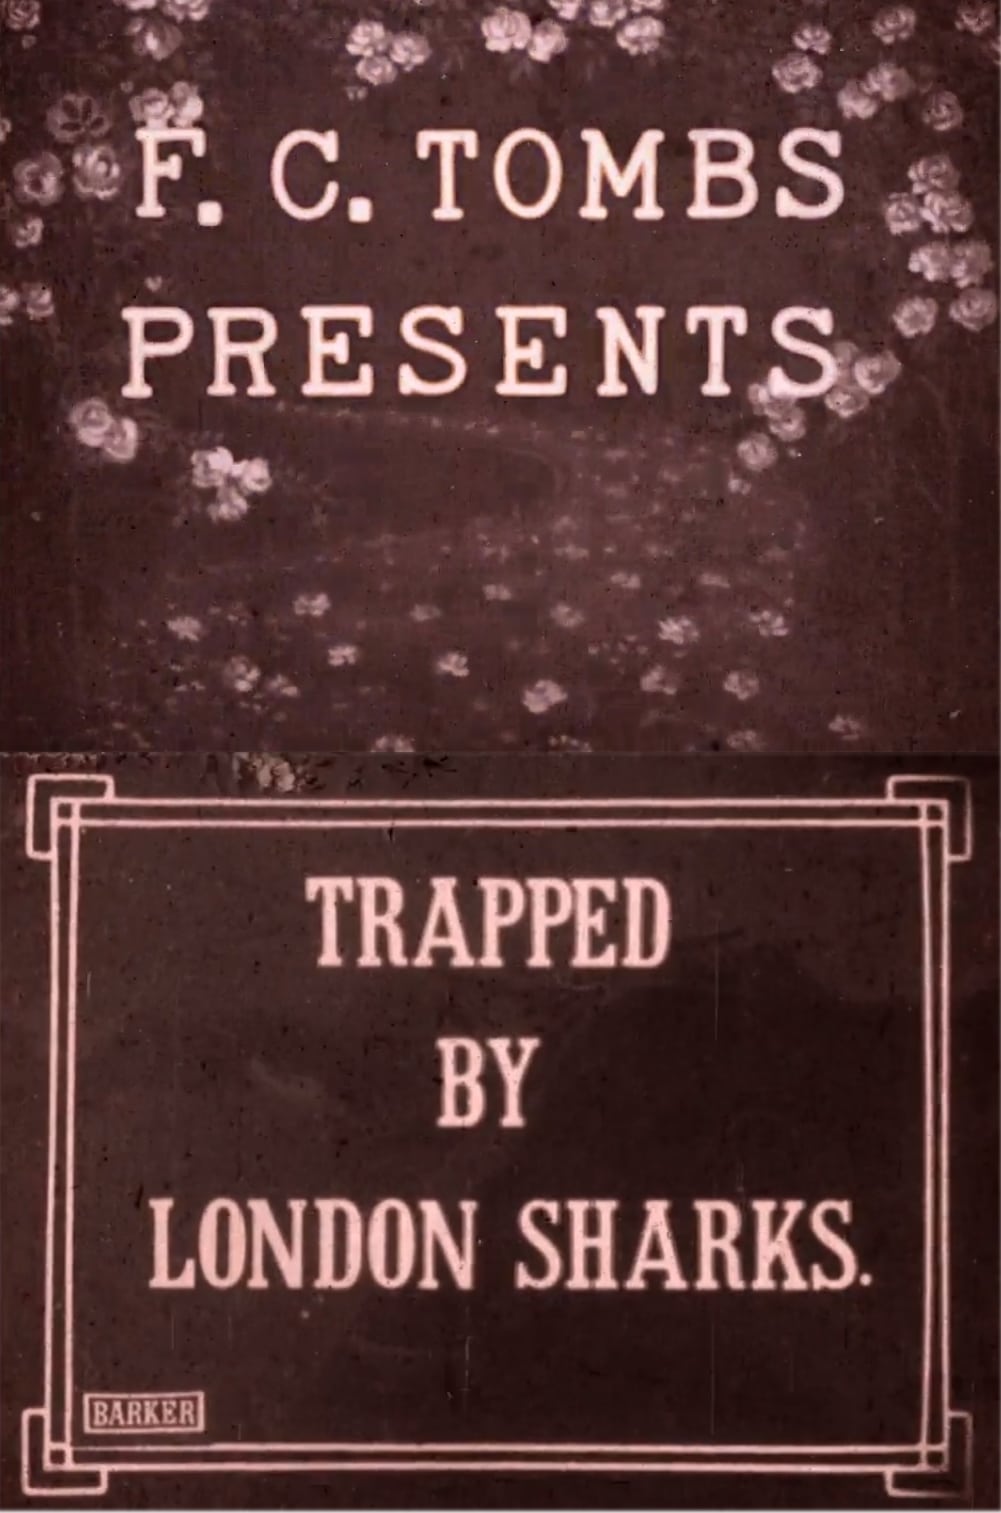 Trapped by London Sharks